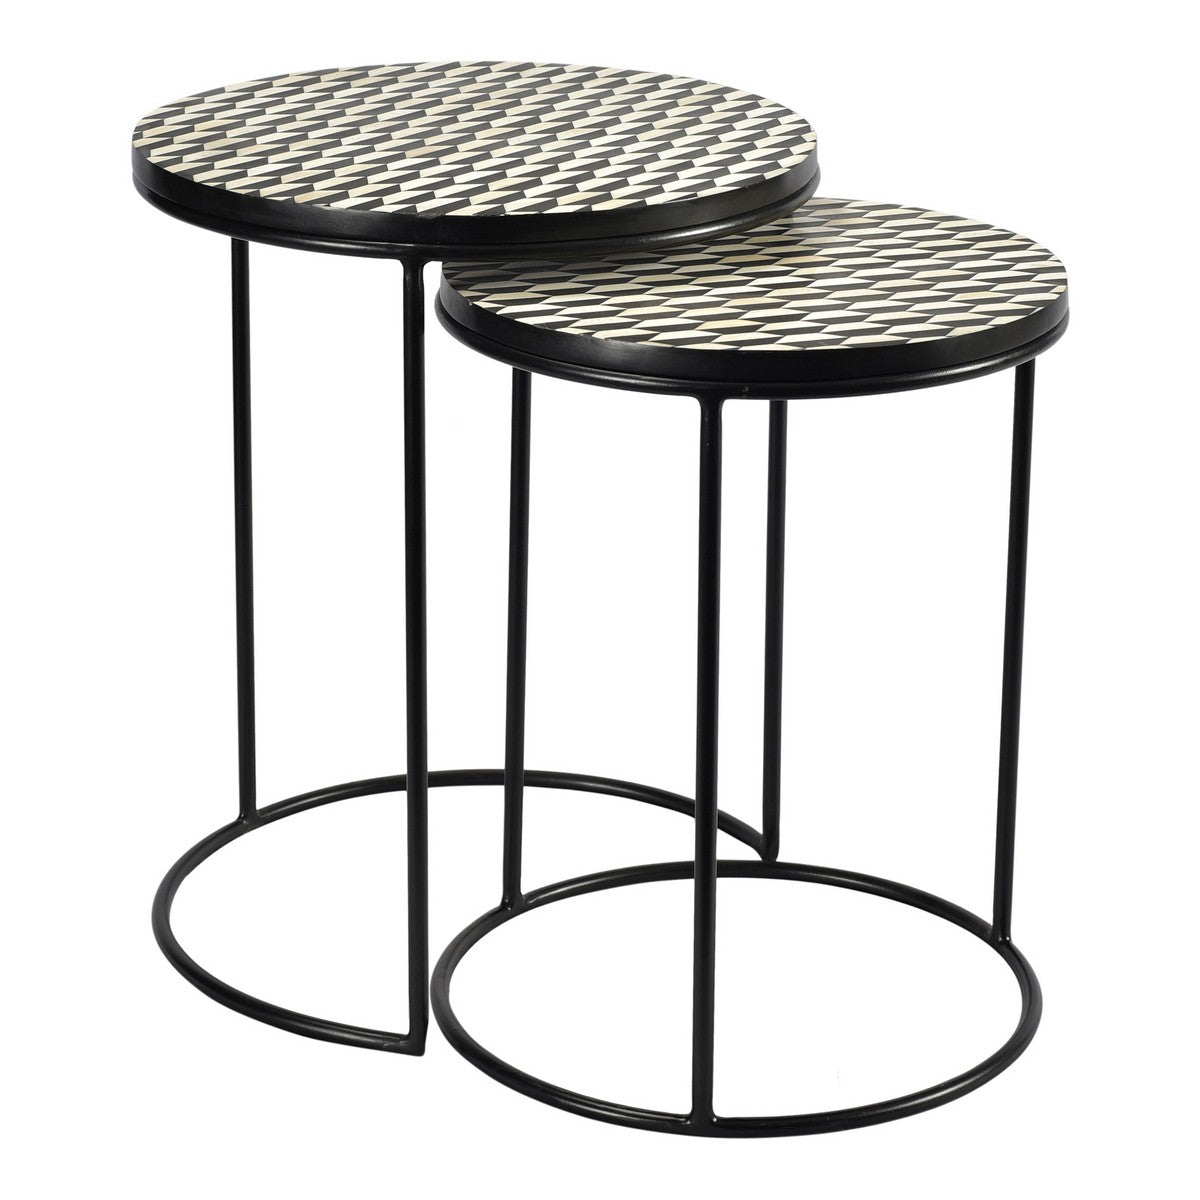 Moe's Home Collection Optic Nesting Tables Set of Two - GZ-1009-43